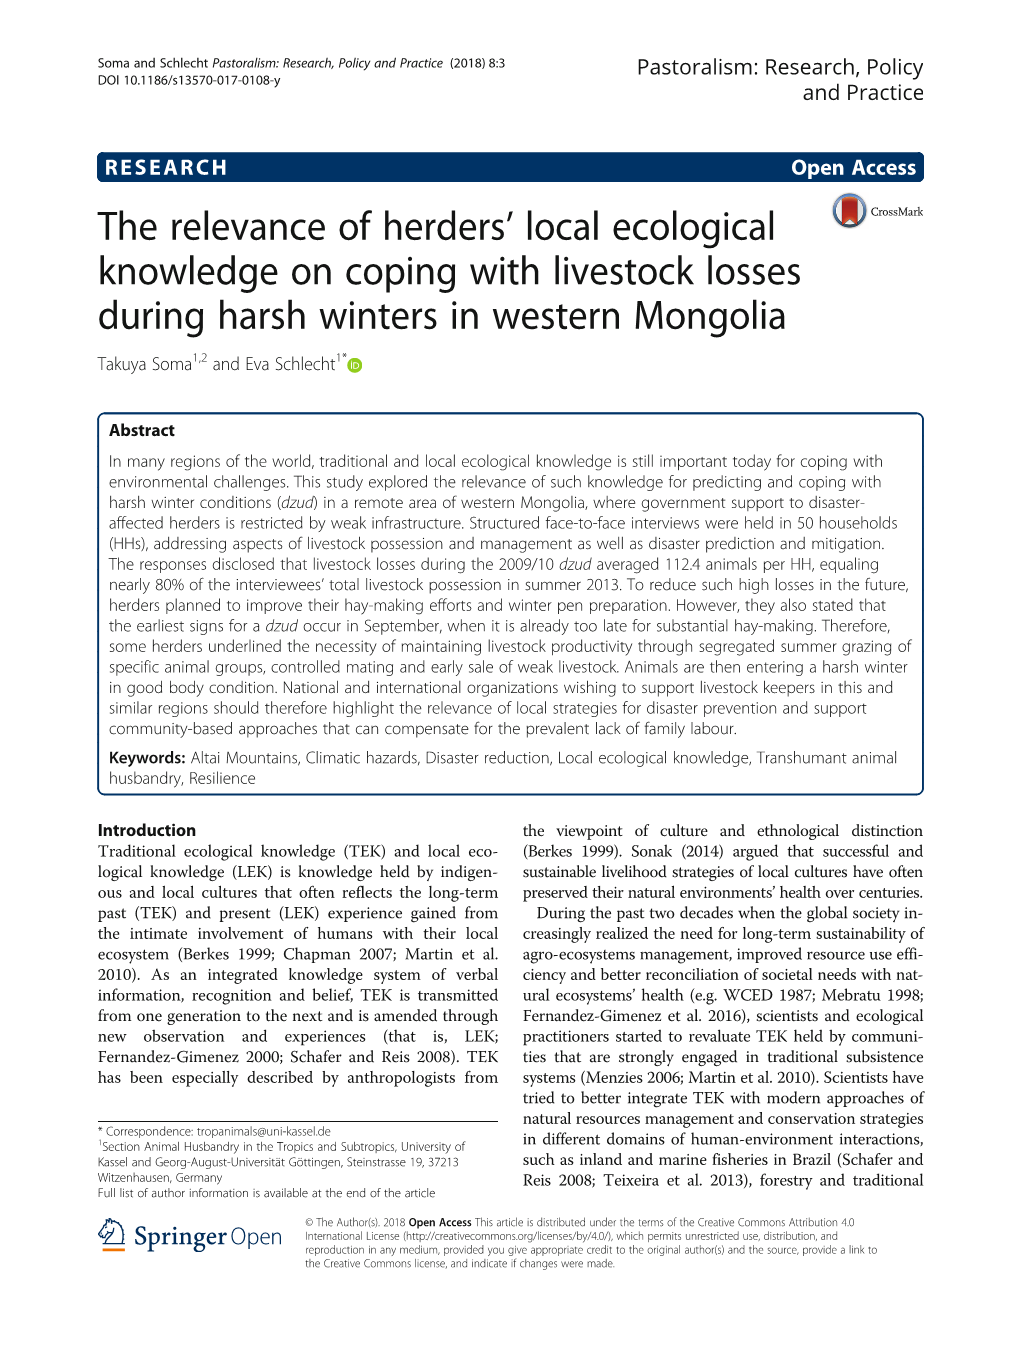 The Relevance of Herders' Local Ecological Knowledge on Coping